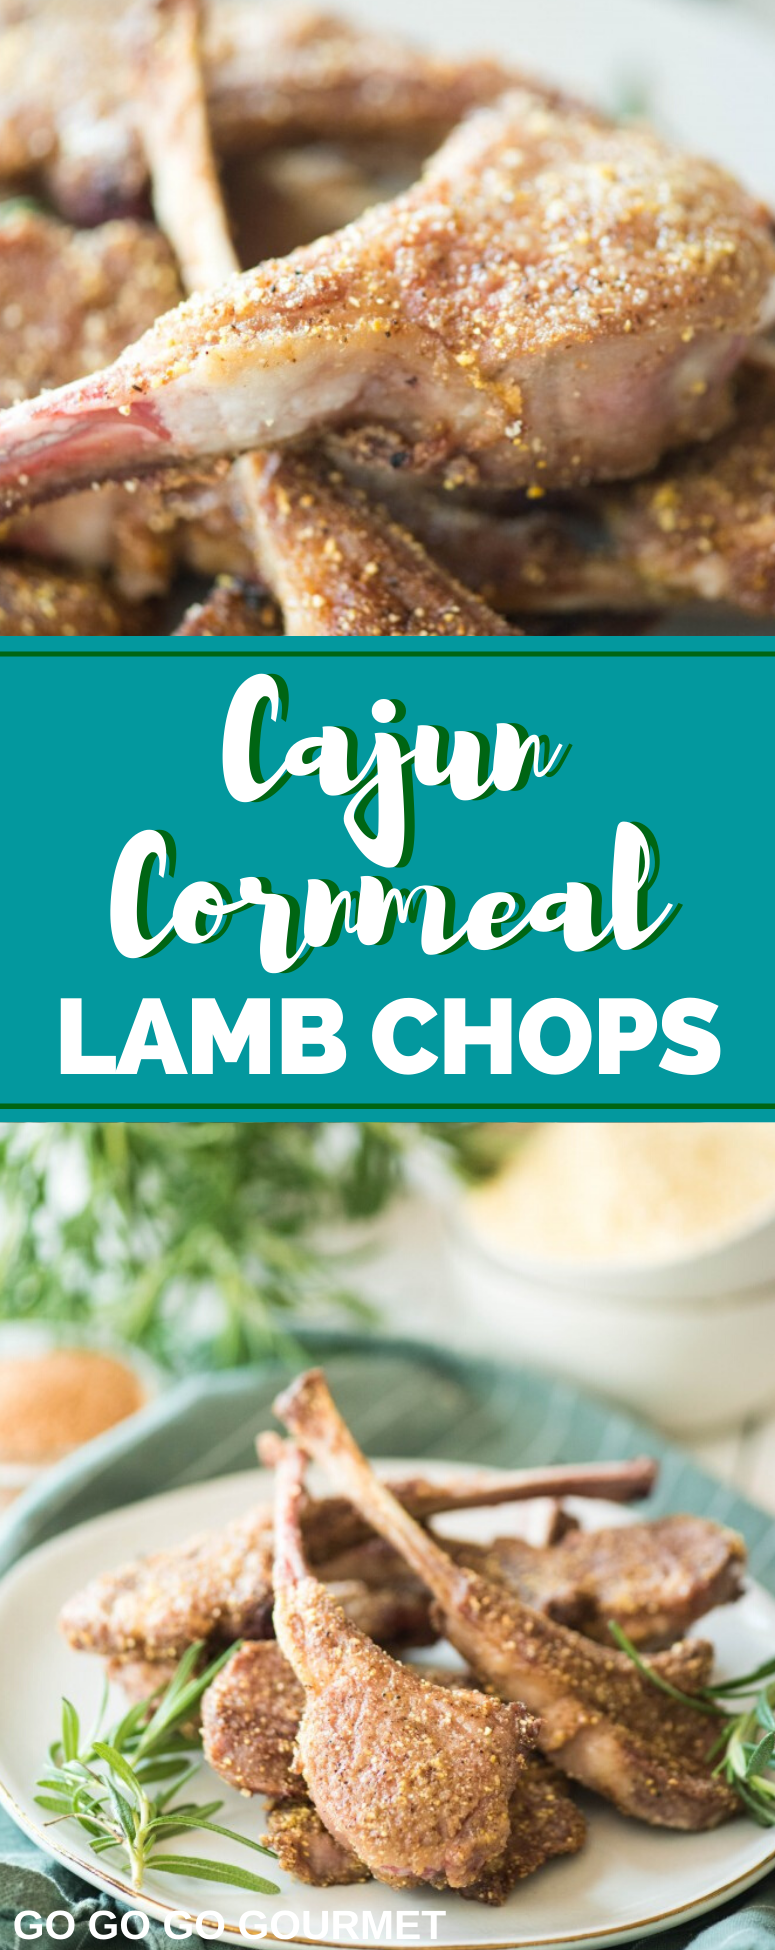 This easy pan seared Cajun Cornmeal Lamb Chops recipe will have you feeling like you're at a fine dining restaurant! Prepared in a cast iron skillet rather than the oven, it has the perfect amount of spice and crunch. #pansearedlambchops #easylambchopsrecipes #easydinnerrecipes #gogogogourmet via @gogogogourmet